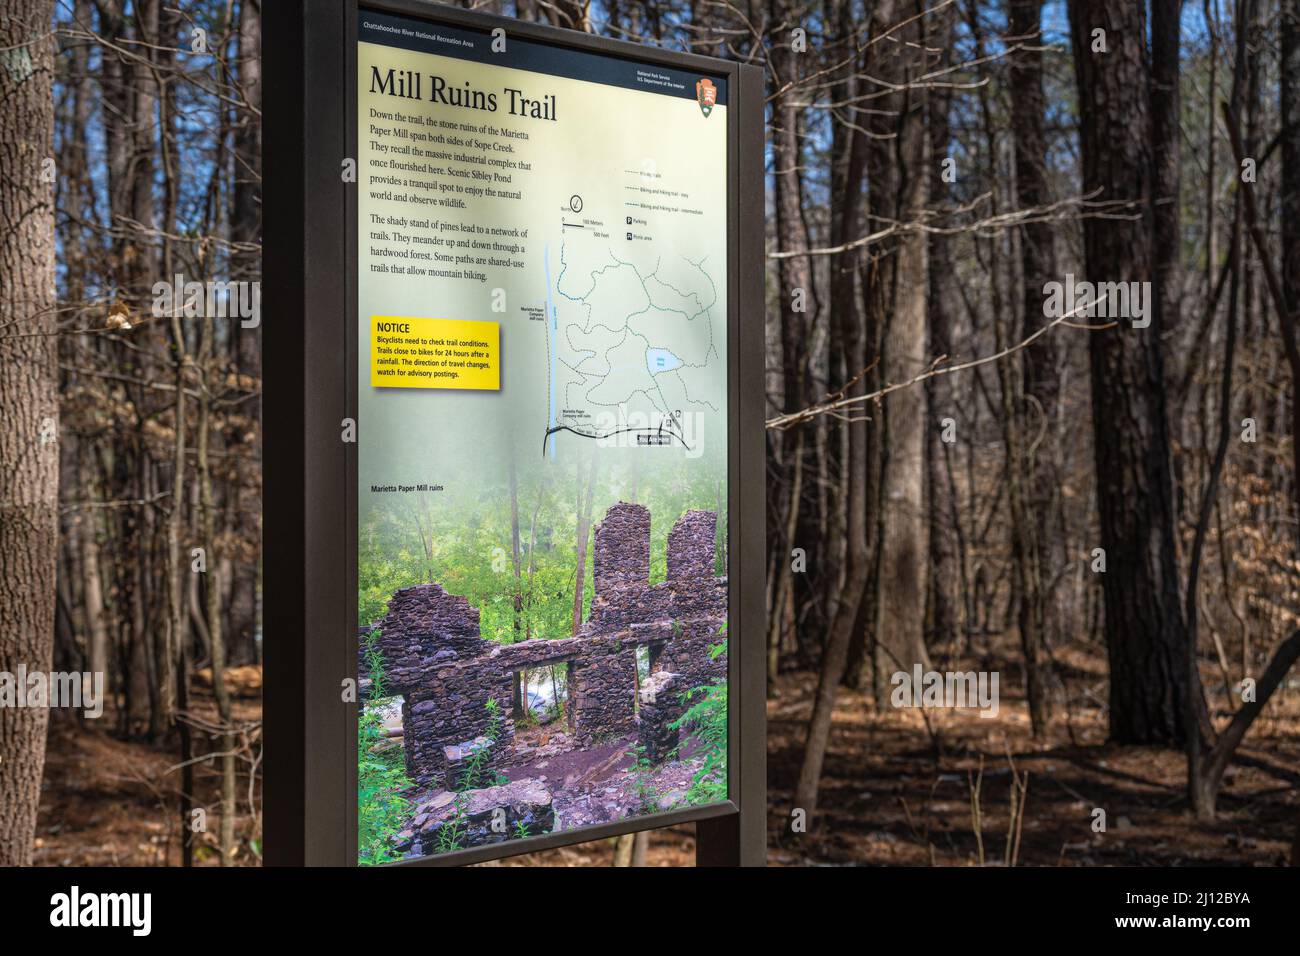 National Park Service informational sign for the Mill Ruins Trail to Sope Creek Paper Mill Ruins in Marietta, Georgia. (USA) Stock Photo